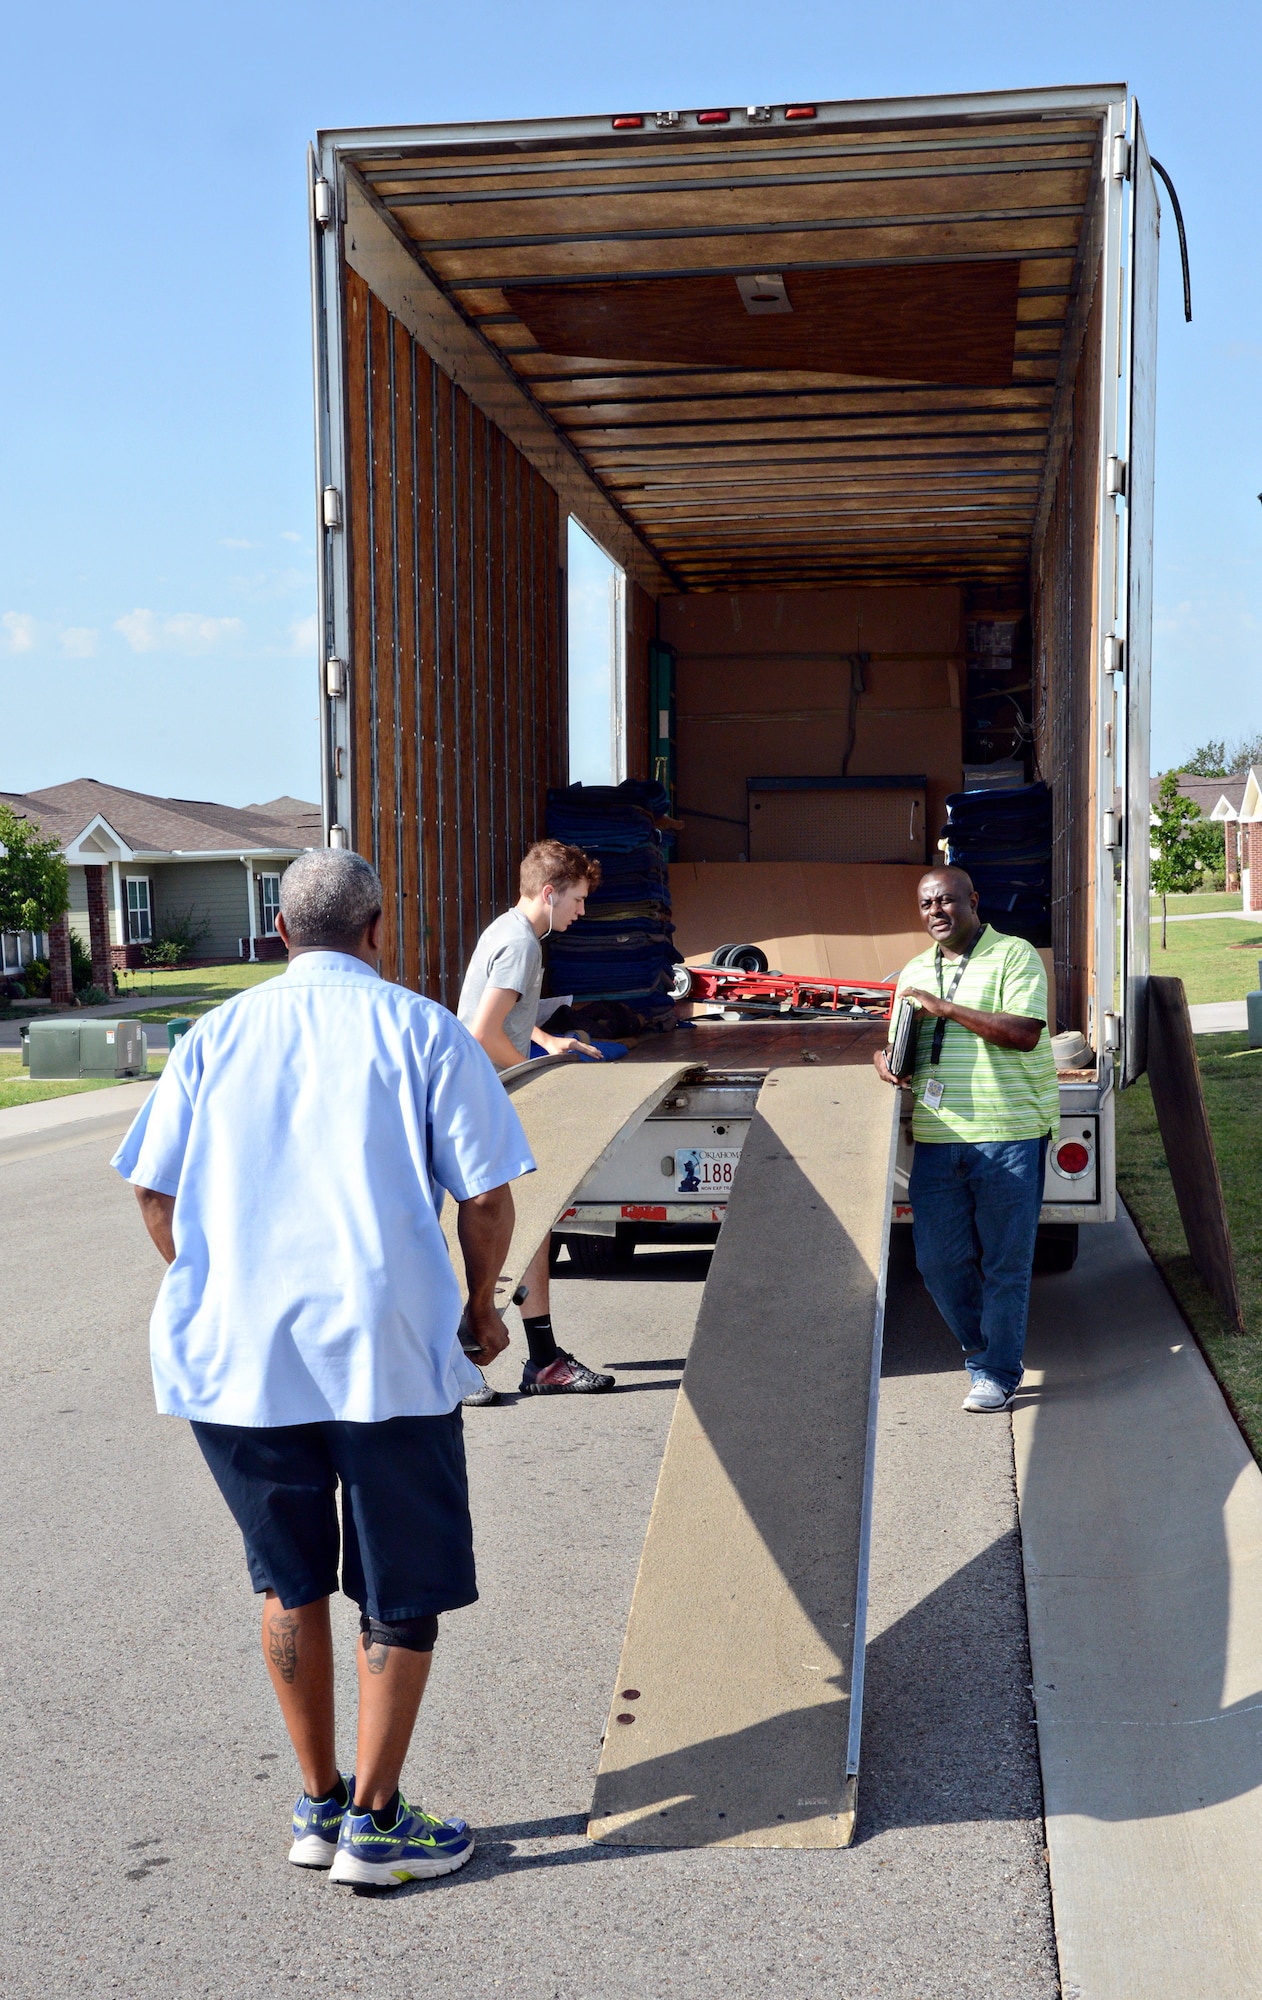 Ronald Jackson, right, a quality assurance inspector with the 72nd Logistics Readiness Squadron’s Personal Property and Passenger Movement Section, talks with members of a moving company as they prepare to load a family’s household belongings during their PCS move. (Air Force photo by Kelly White)